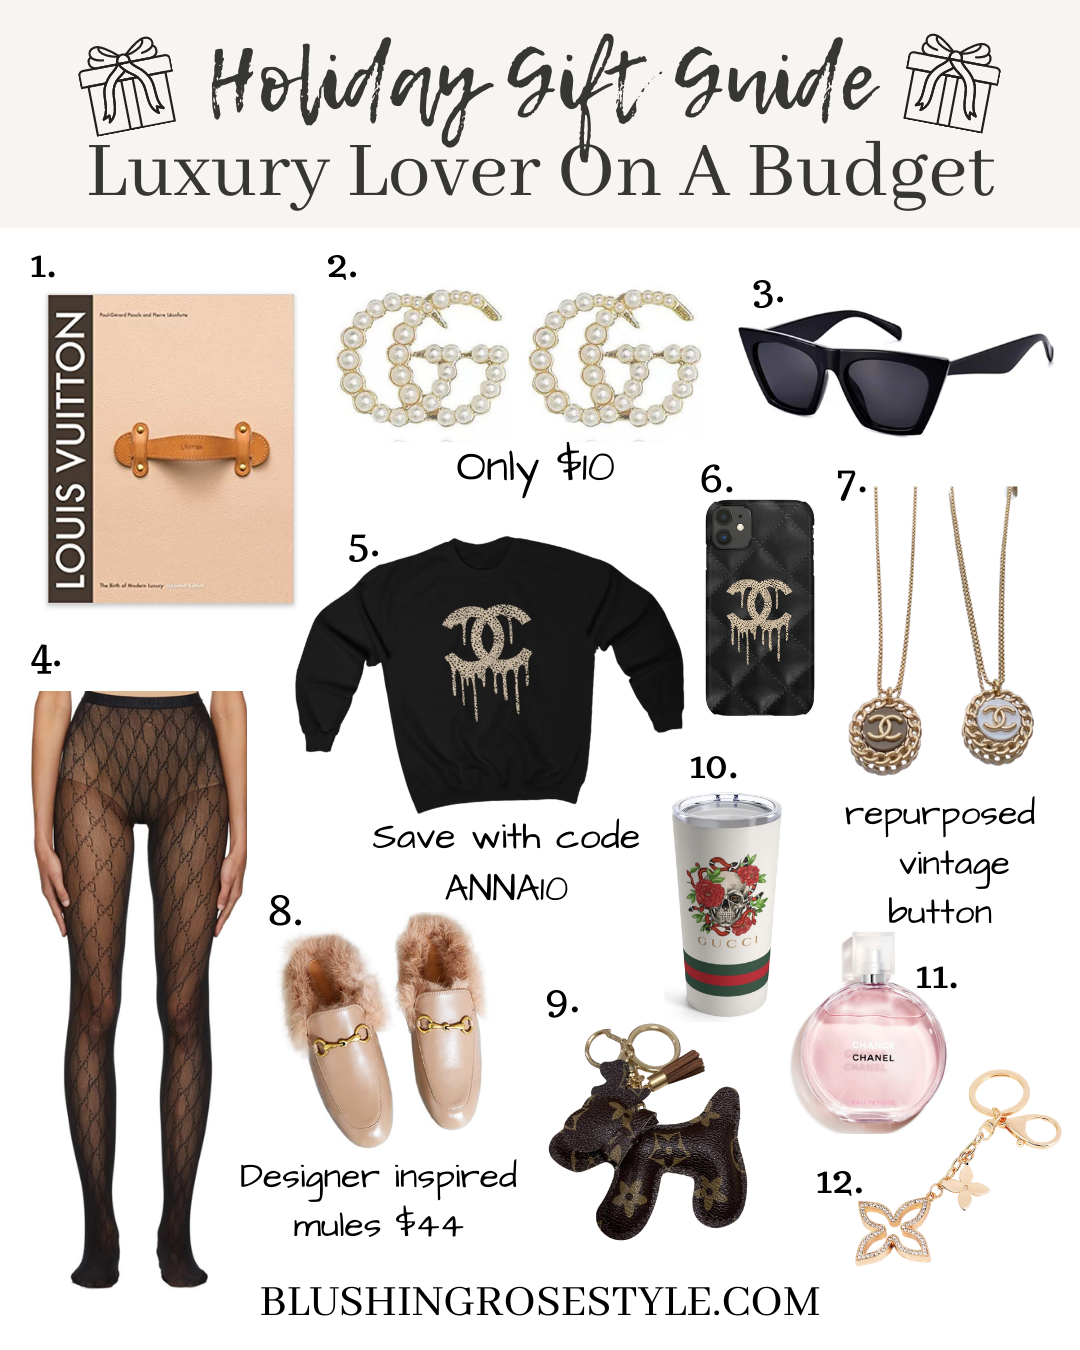 Gifts Under $25 And For the Luxury Lover On A Budget